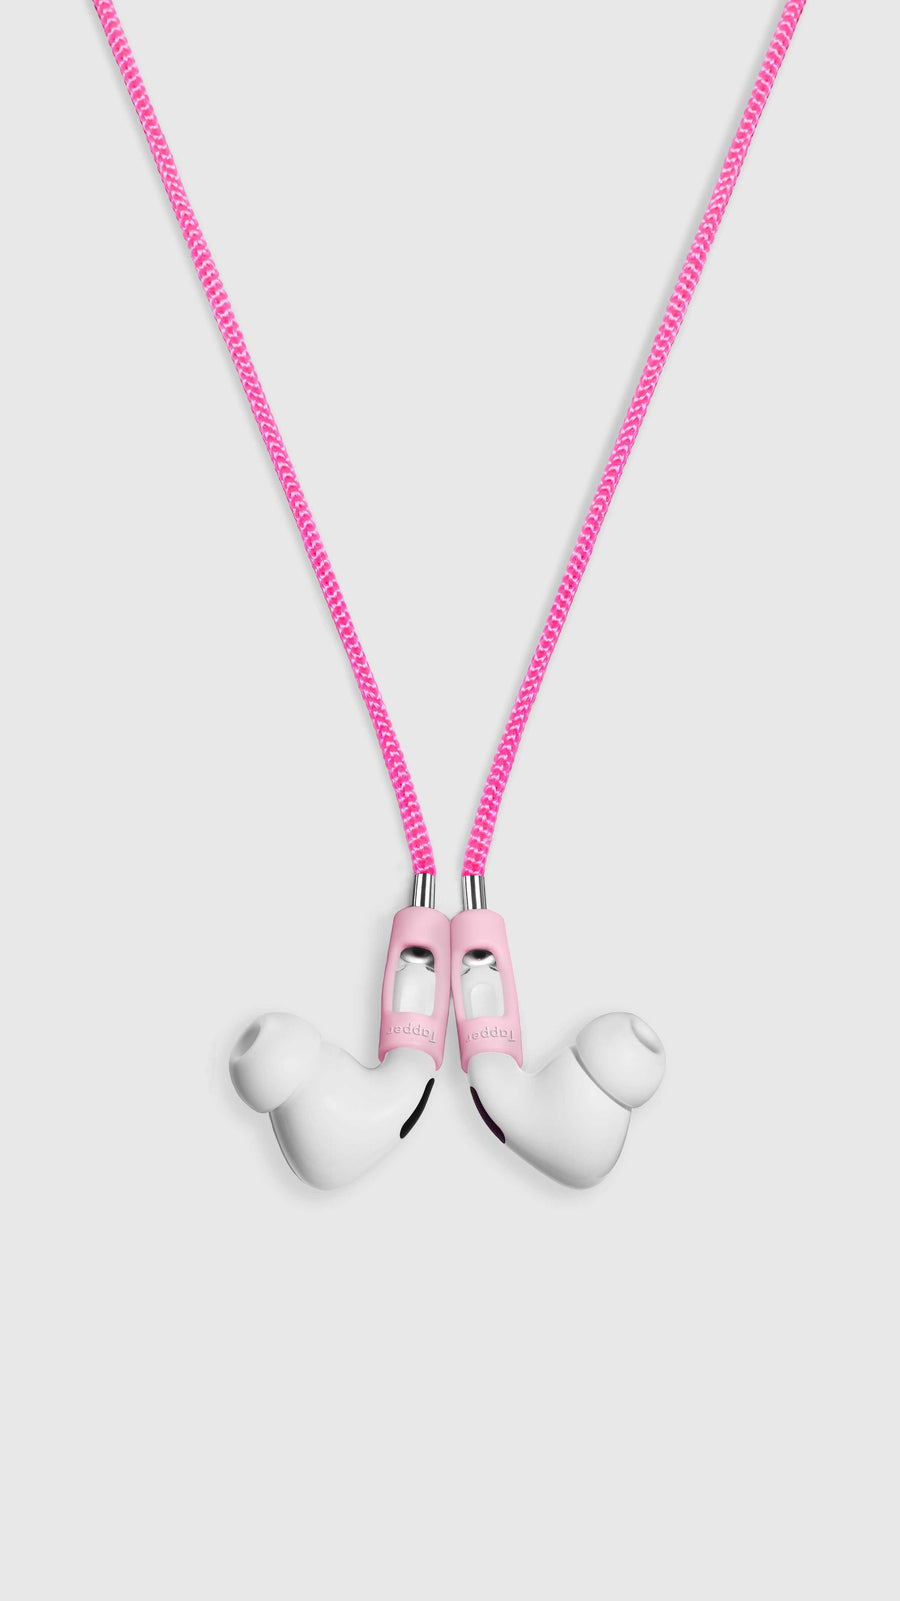 Tapper active’s original nylon straps protects your Apple AirPods and AirPods Pro. The accessible AirPods necklace steps up your AirPods and AirPods Pro game. Worried about losing your AirPods? Magnetic anti-lost straps with built-in magnetic lock for convenient and hassle-free safekeeping around your neck. The next must-have AirPods accessory designed for working out and running. Compatible with all generations of AirPods and AirPods Pro. Designed in Sweden by Tapper. Free Express Shipping at gettapper.com